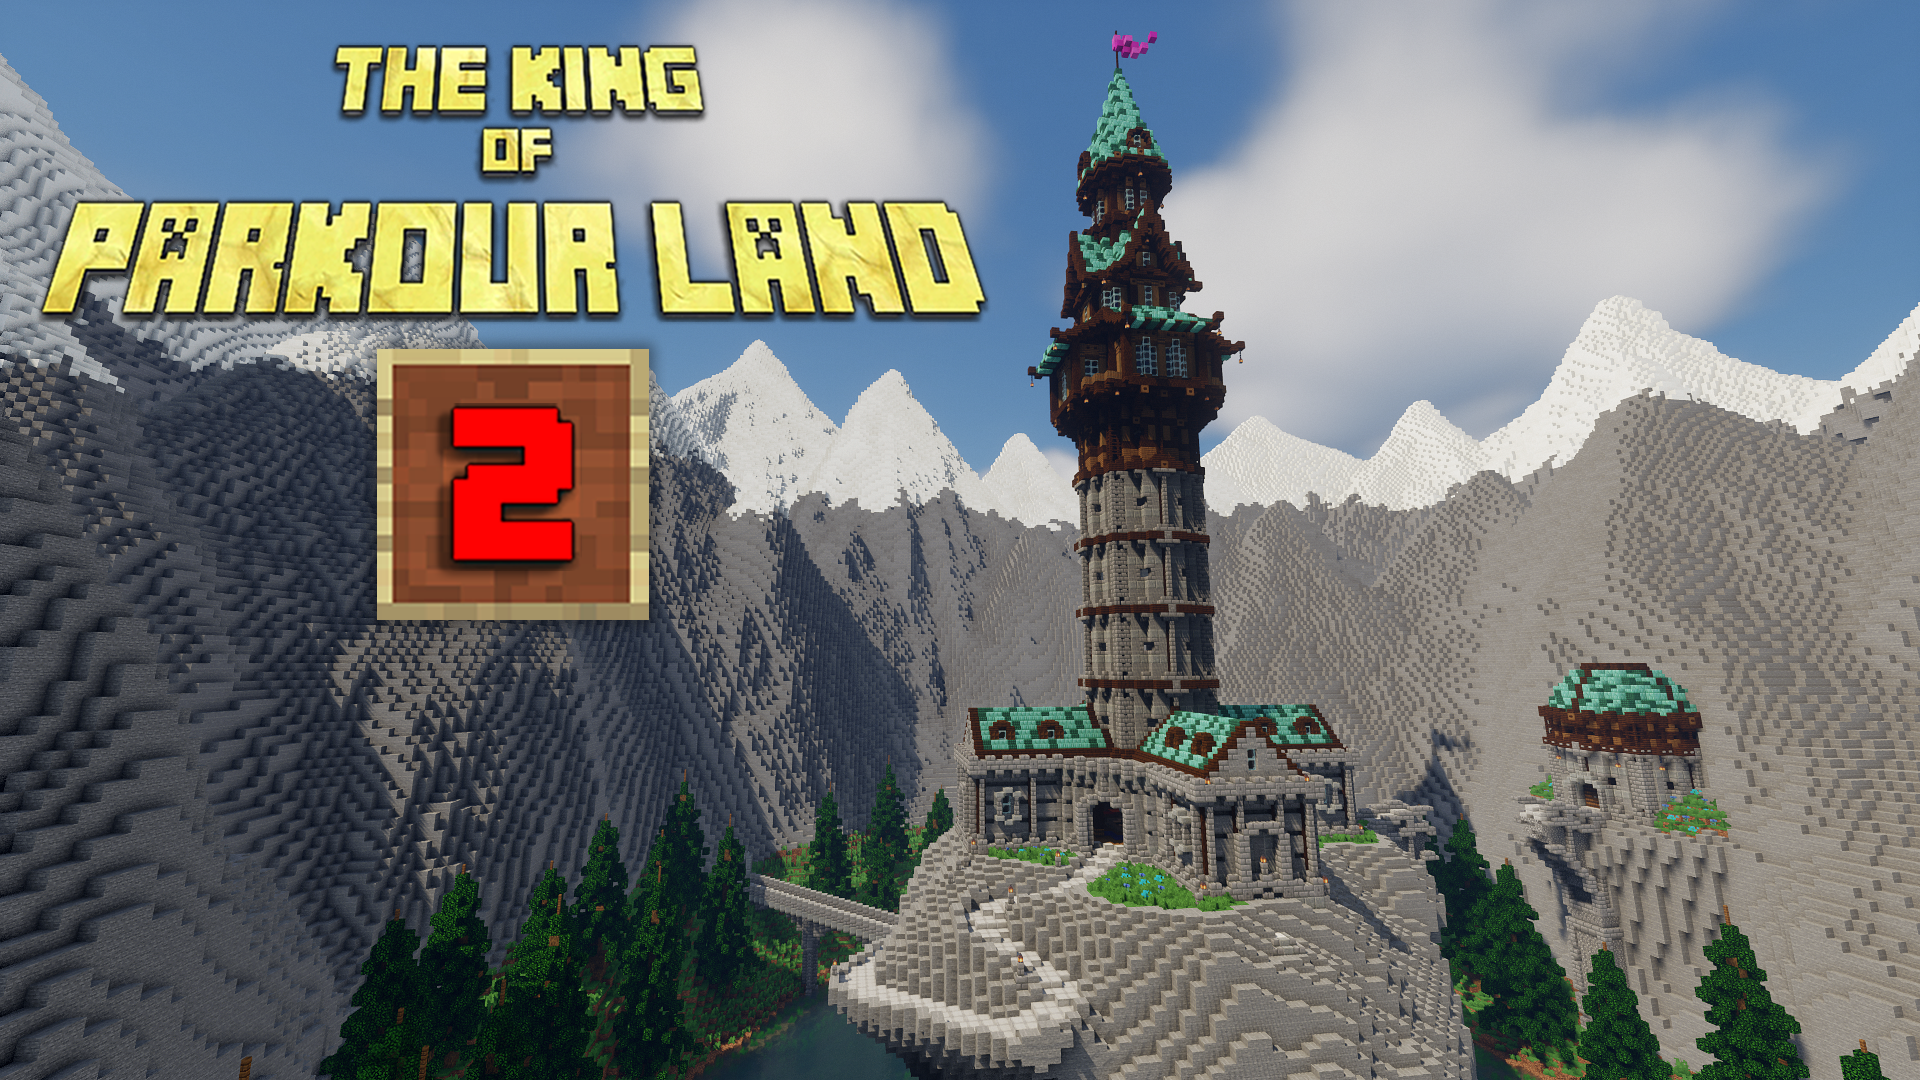 Download The King of Parkour Land 2 for Minecraft 1.16.4